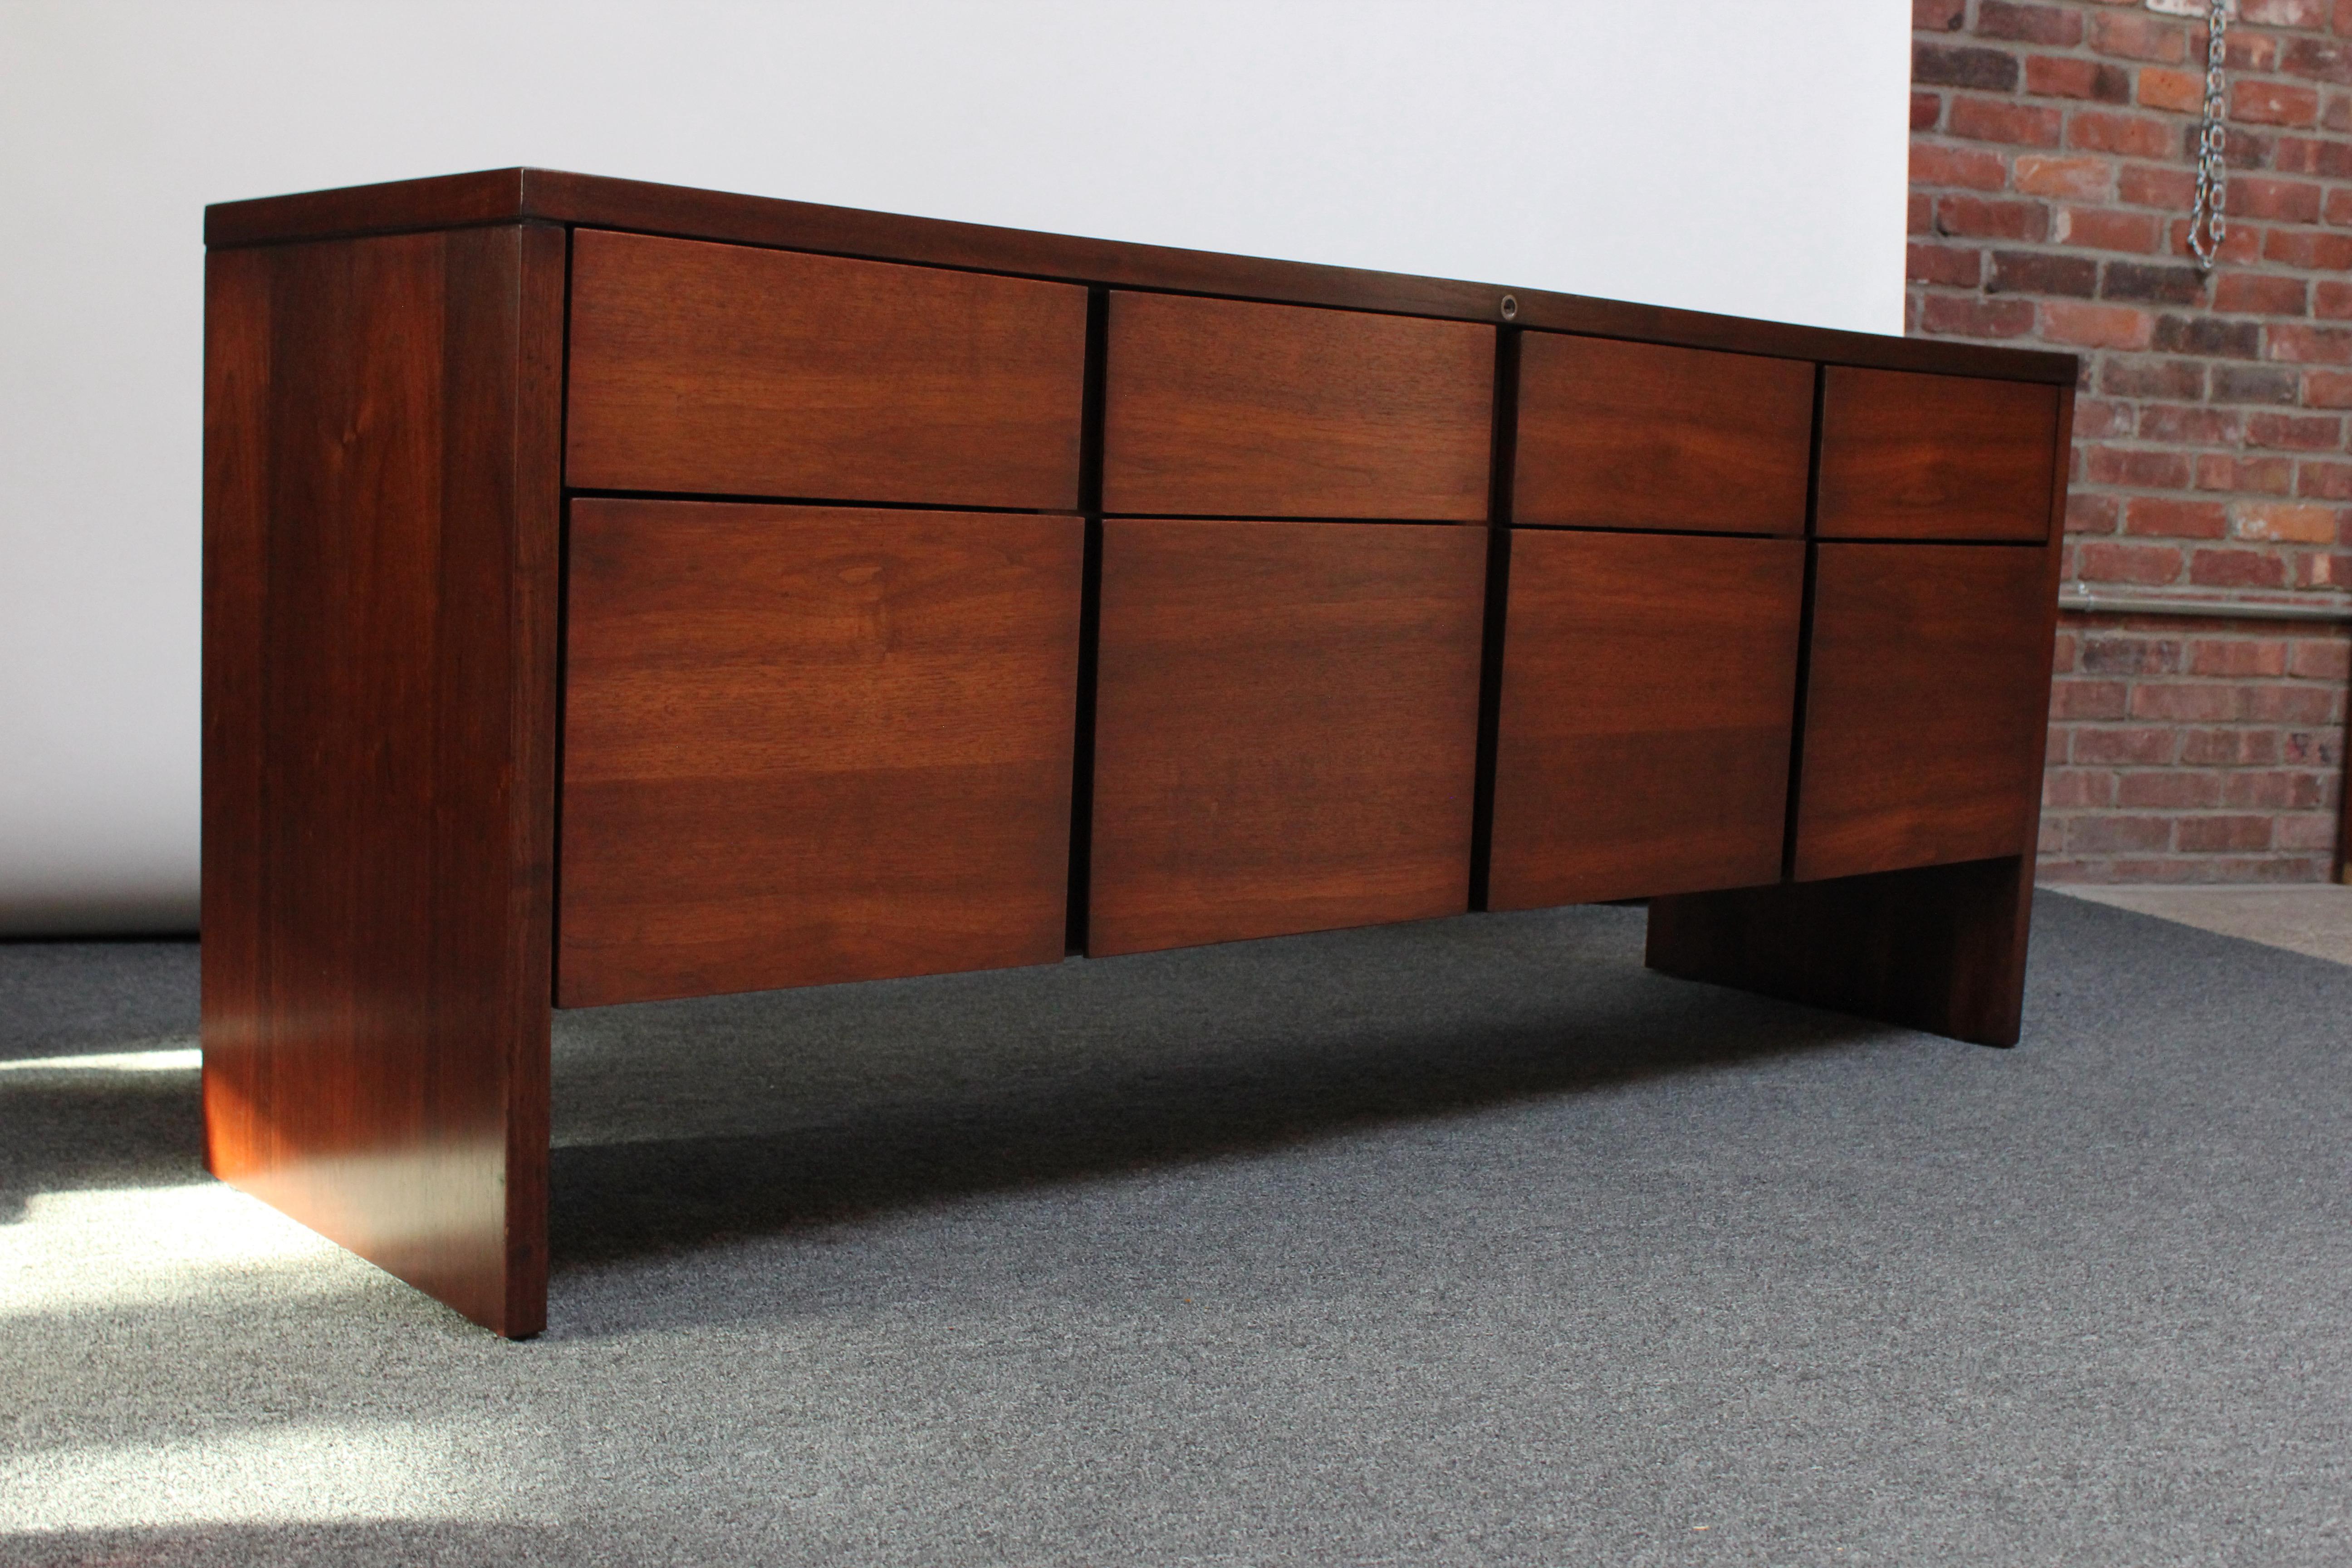 Walnut filing cabinet / credenza manufactured by Steelcase (ca. 1950s, USA). Known for the incorporation of steel in their products, Steelcase pieces are extremely heavy and durable (not delicate and flimsy in the slightest) and were designed for